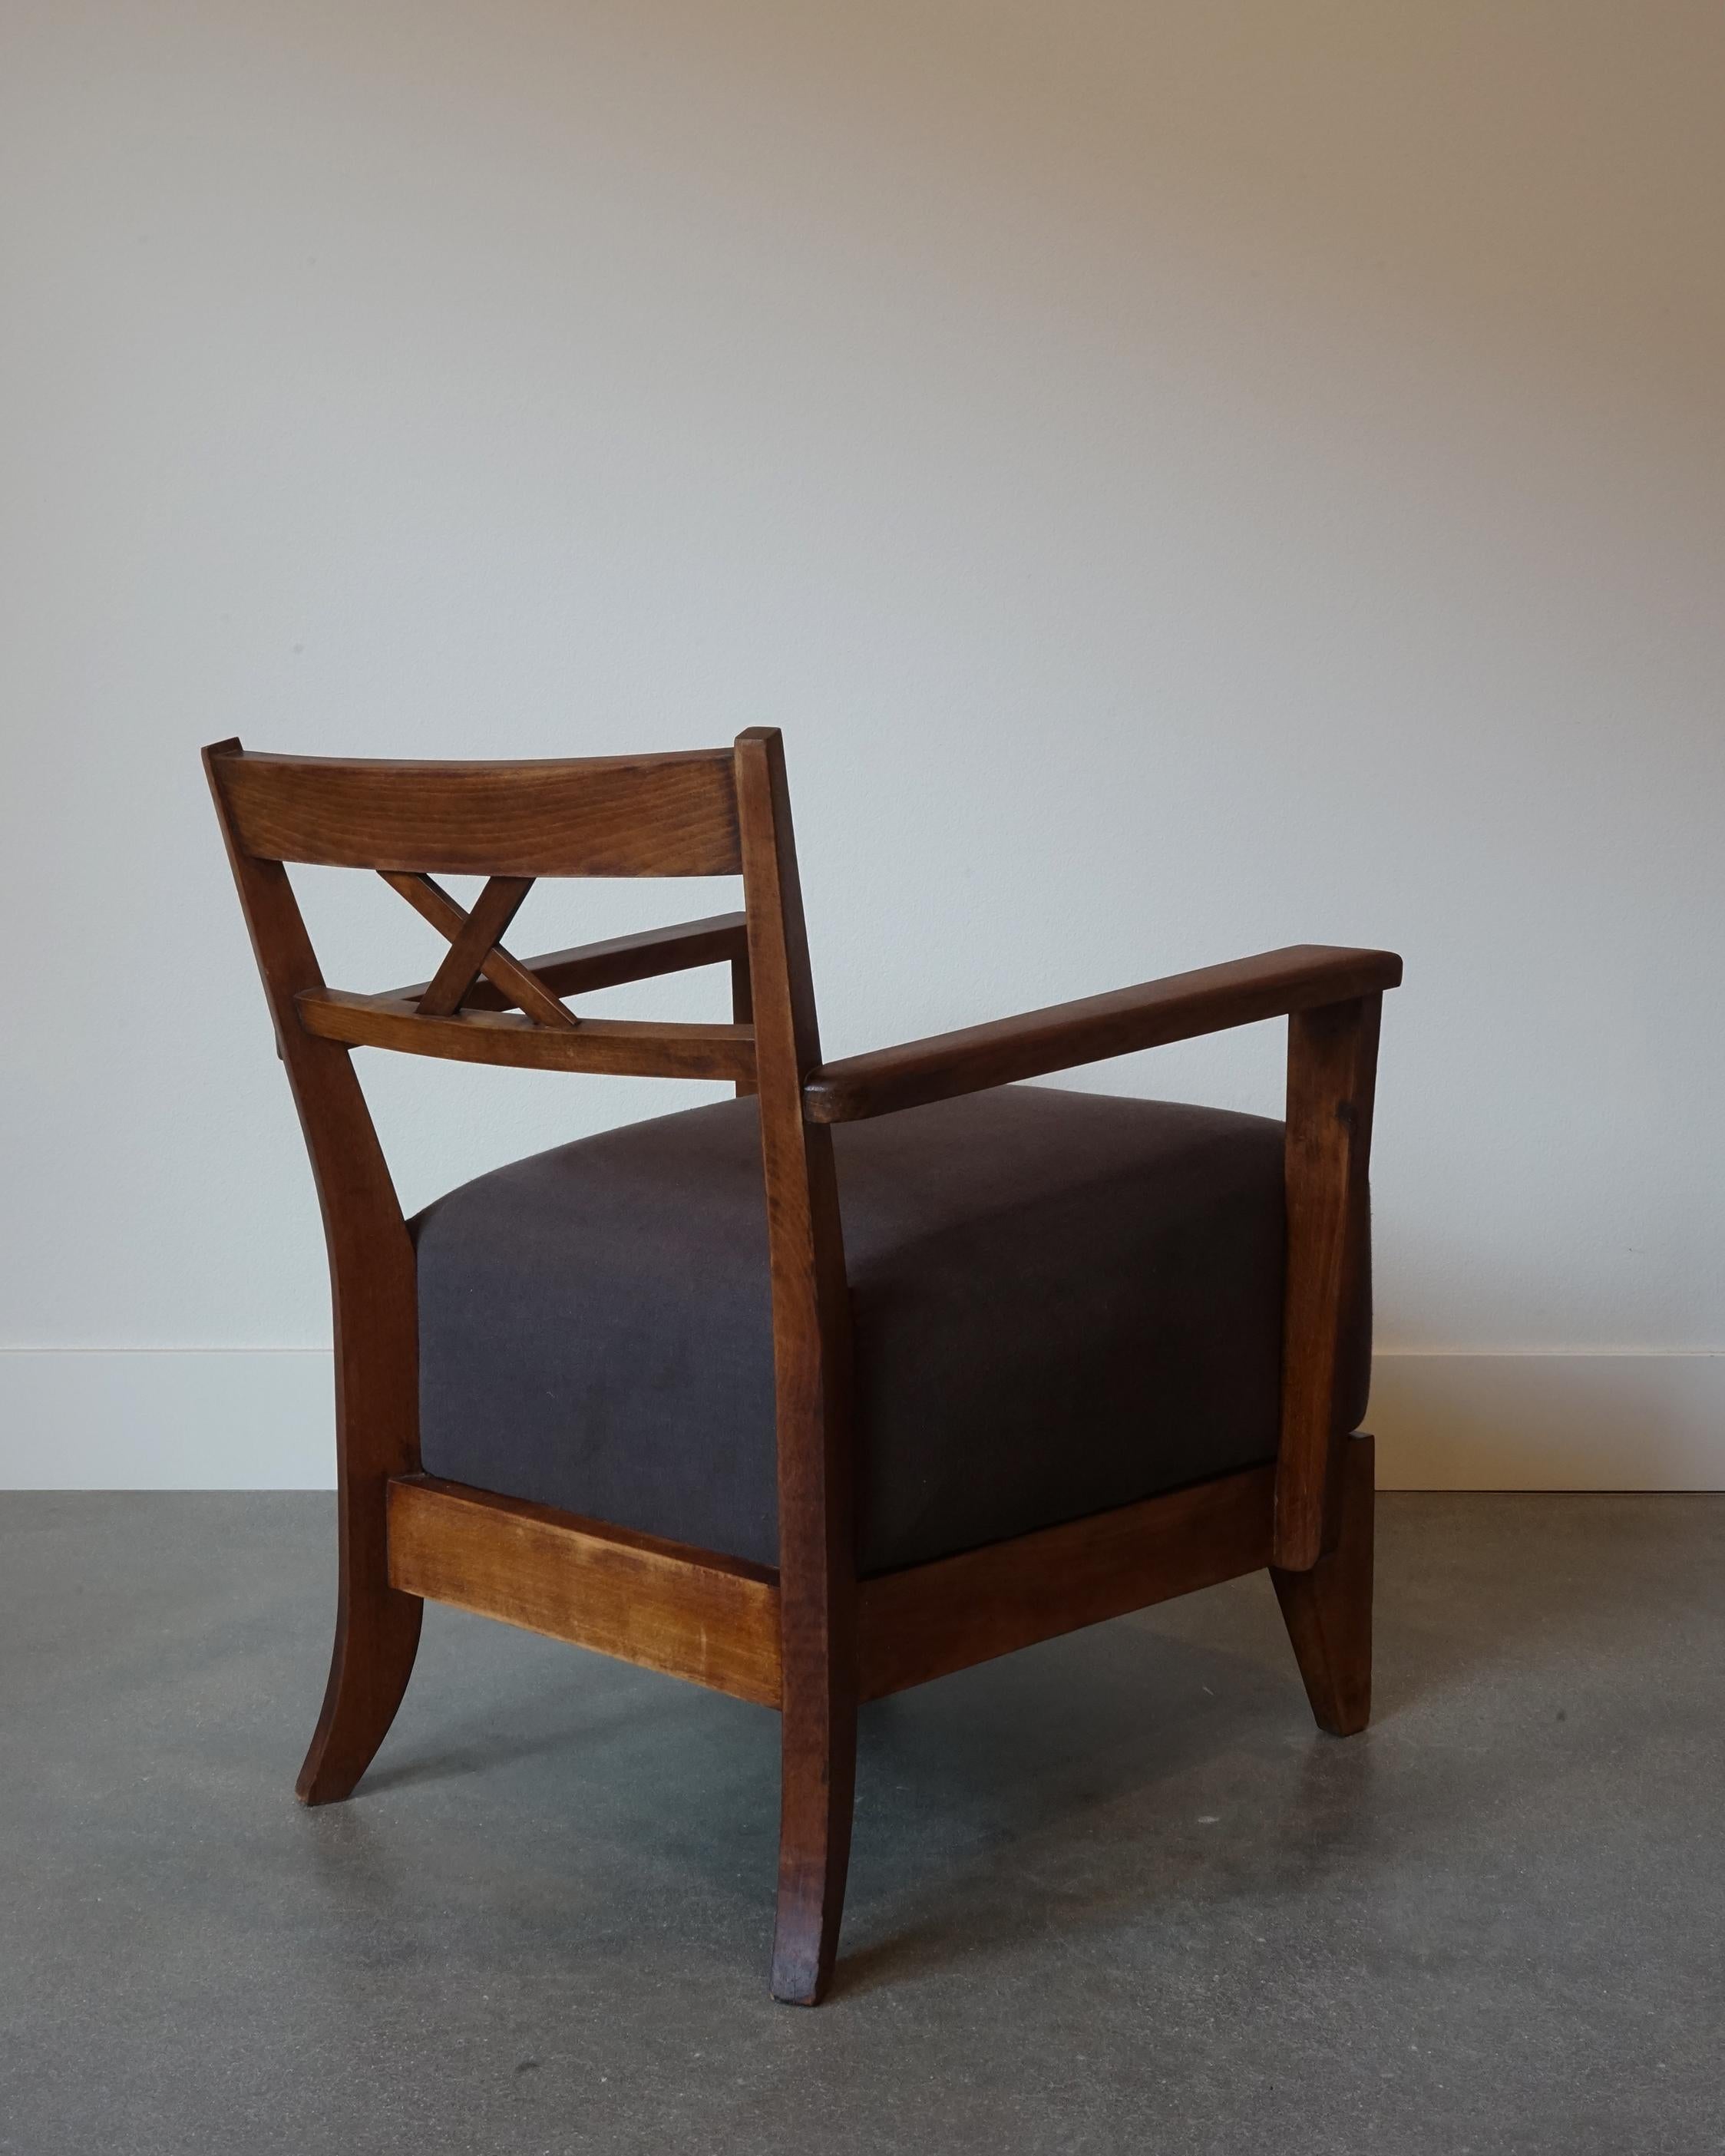 20th Century Vintage French Modernist Oak Lounge Chairs, 1940's, Belgian Linen Upholstery, 2 For Sale